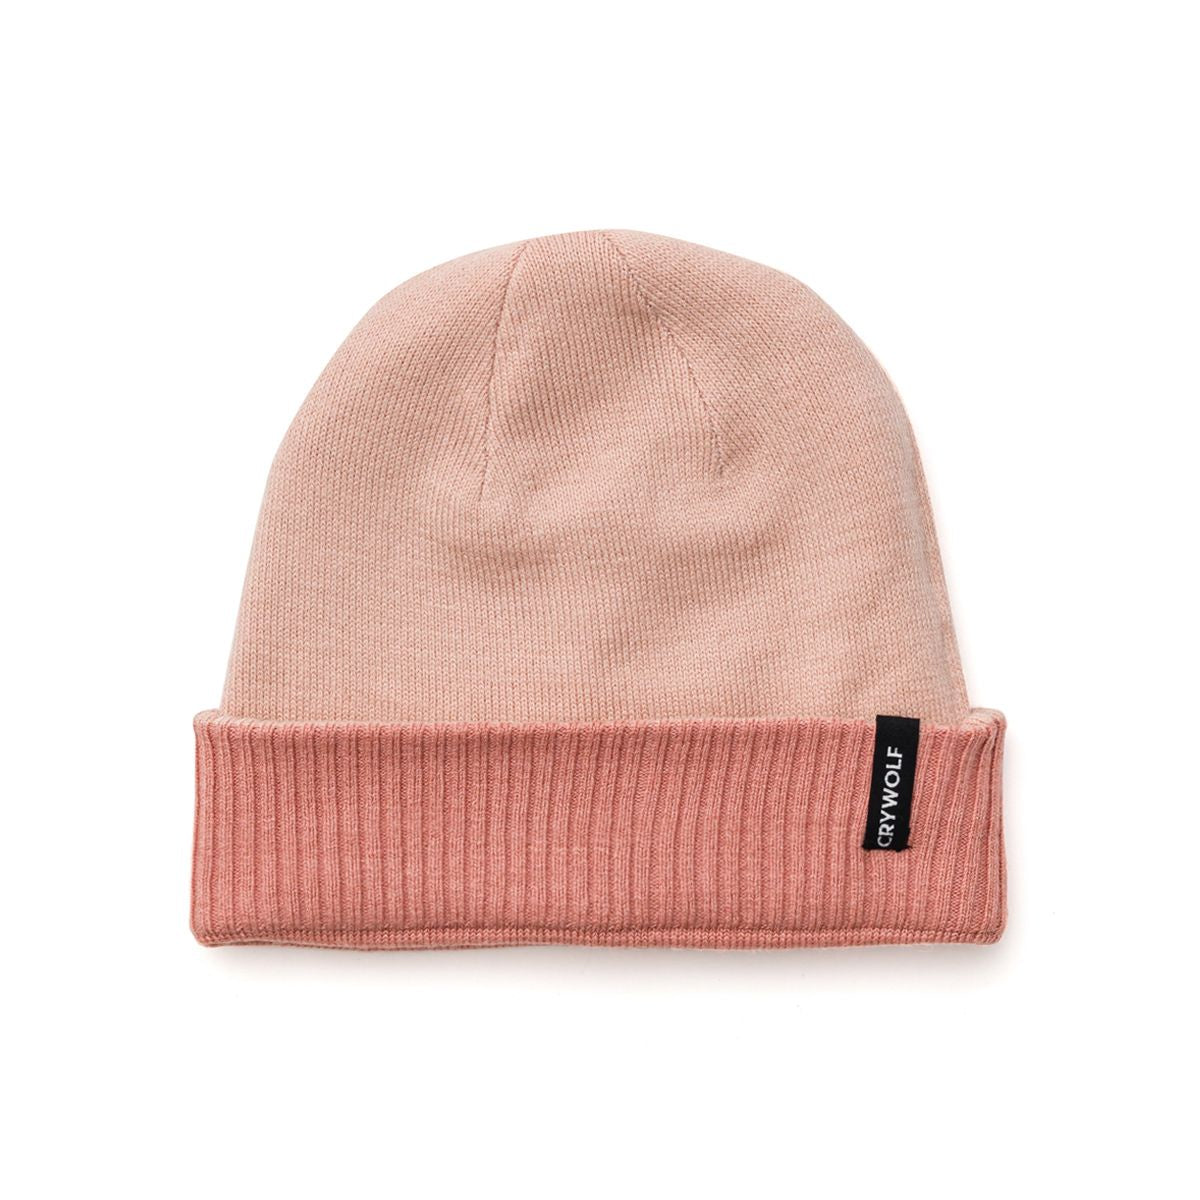 Crywolf - Reversible Beanie - Rose/Dusty Pink